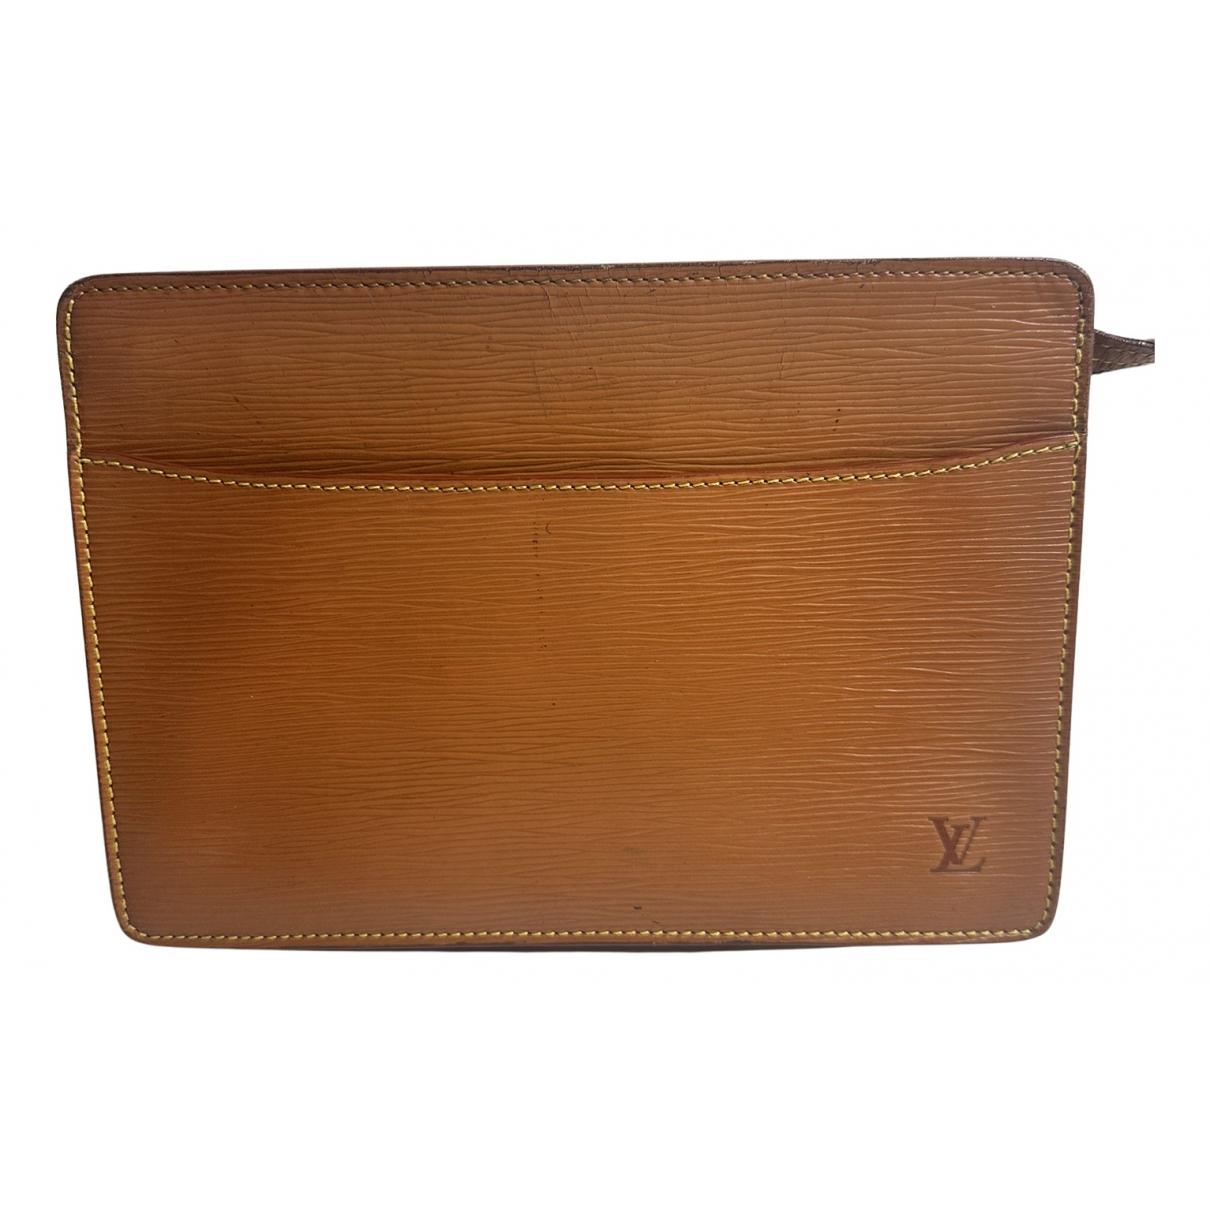 Louis Vuitton Pre-owned Women's Leather Clutch Bag - Ecru - One Size